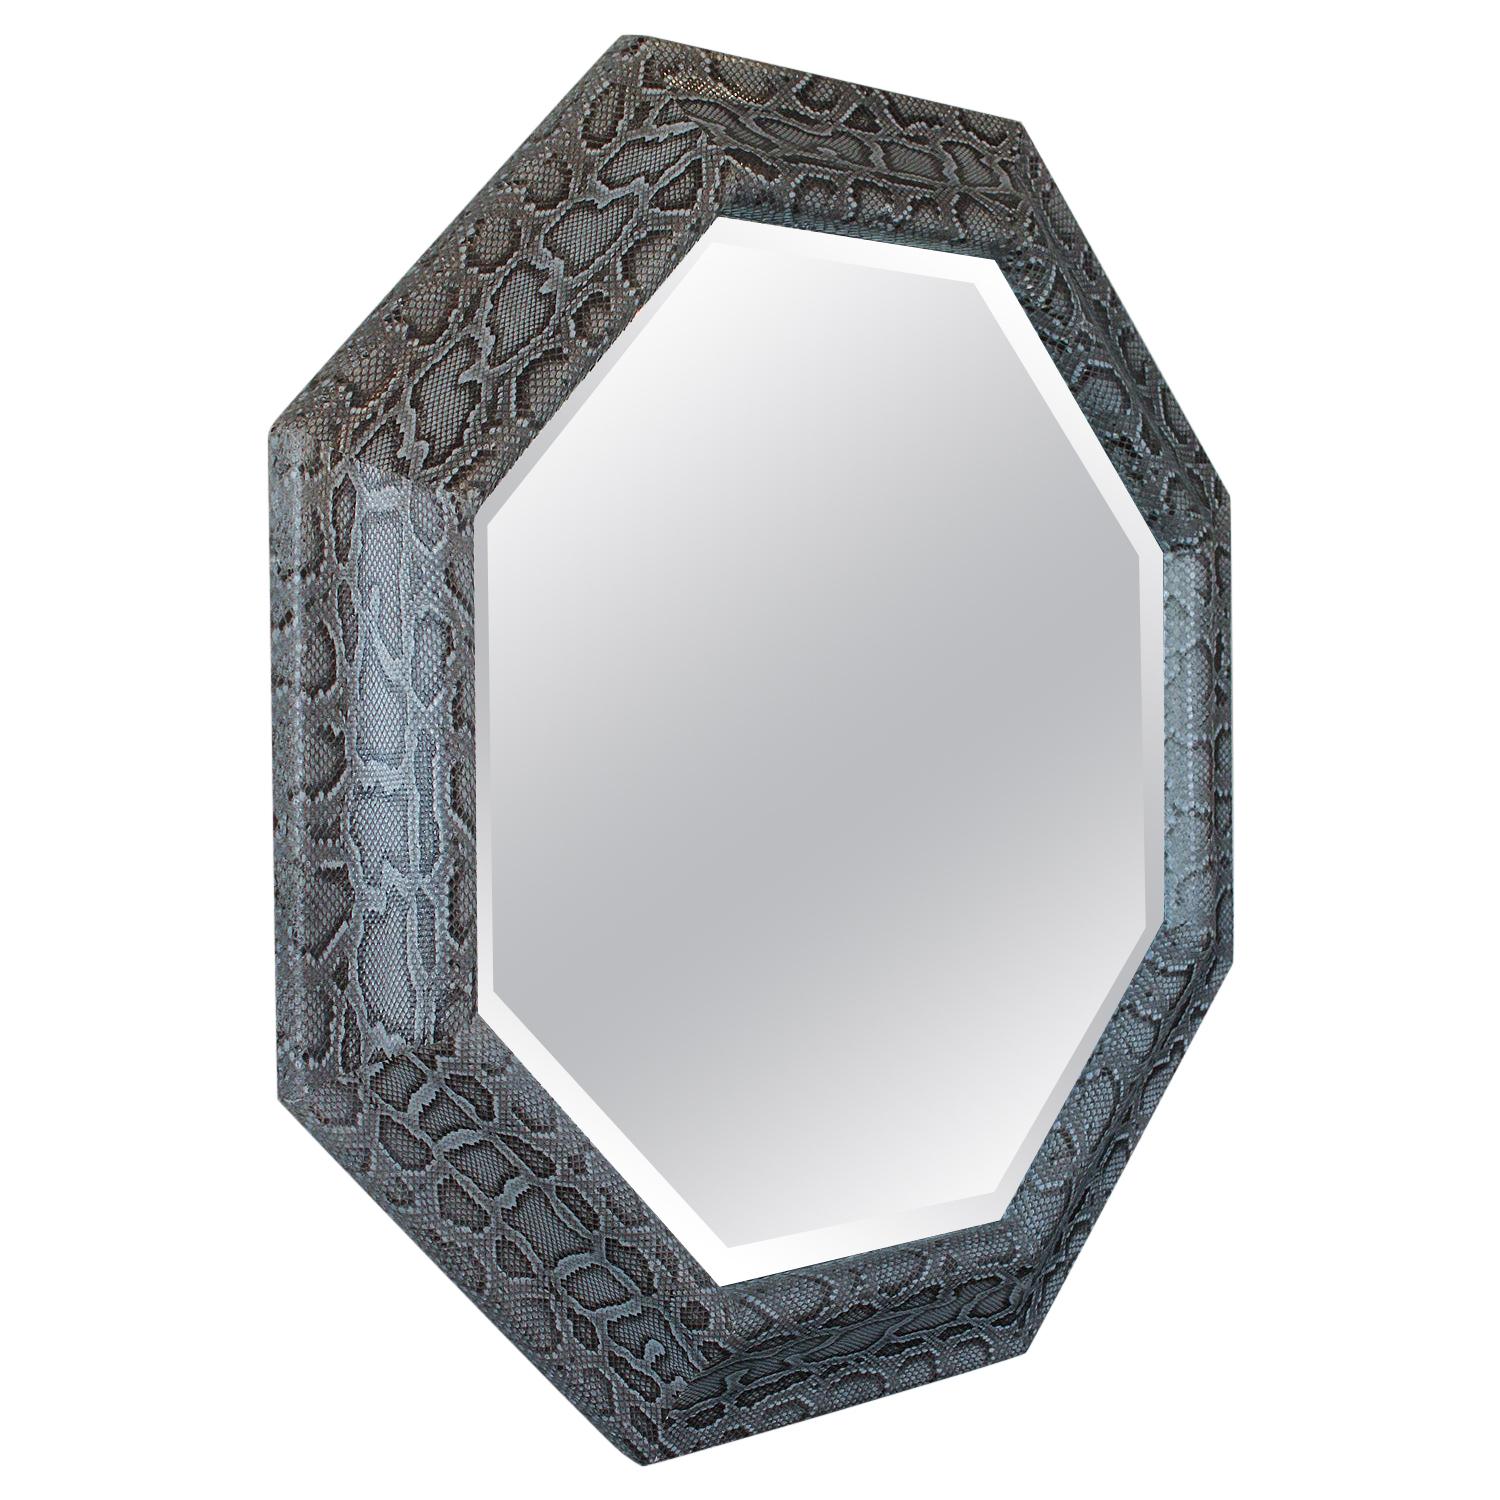 Large Octagonal Mirror in Grey, Brown and Cream Python, circa 1980